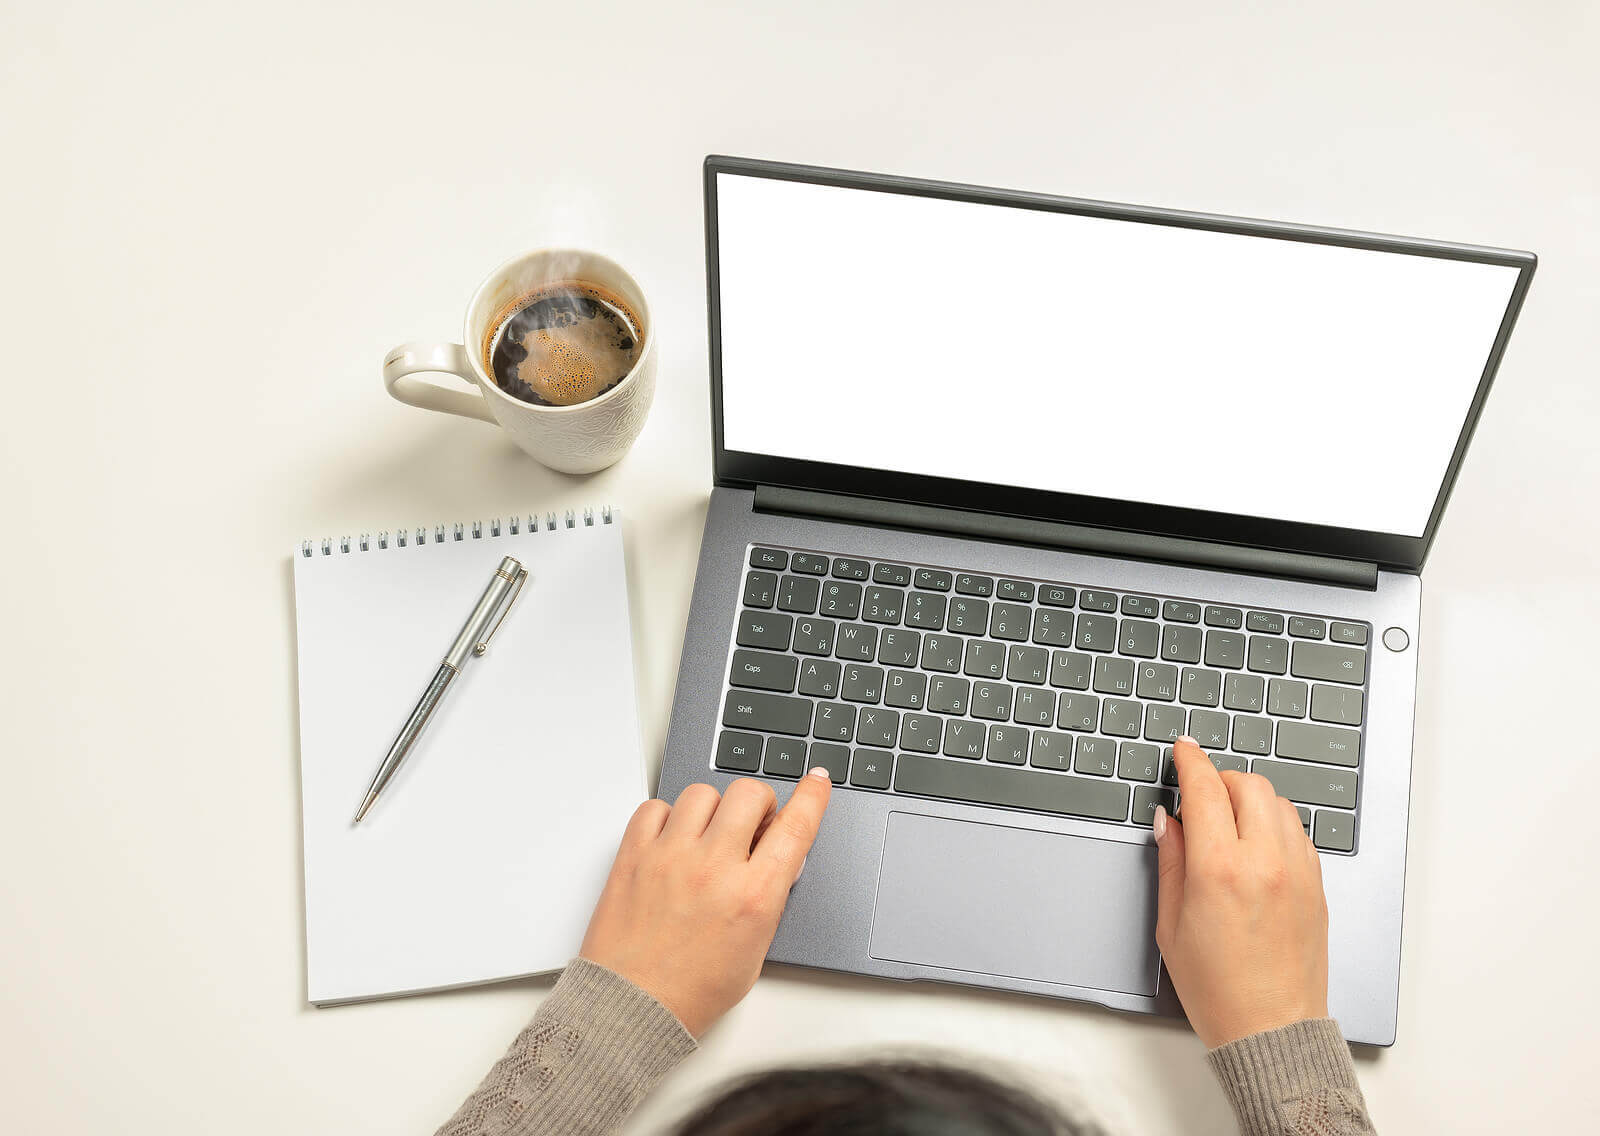 A person's hands typing on a laptop with a notebook by their side. Looking to learn how to cope with your trauma? Our experienced online therapist can teach you. Try online therapy in Austin, TX today!